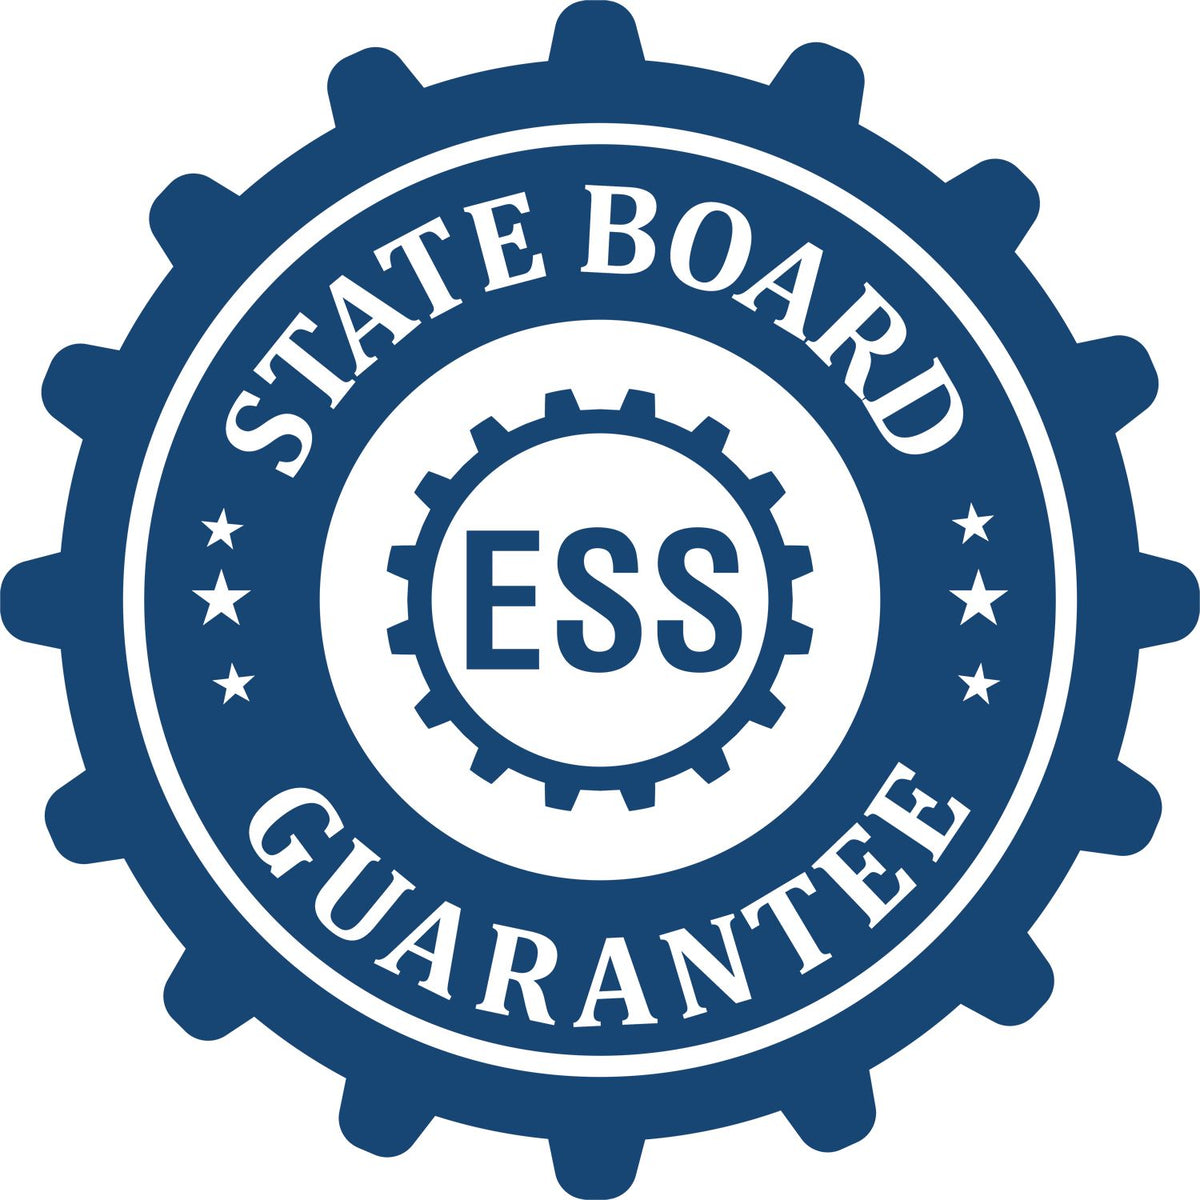 An emblem in a gear shape illustrating a state board guarantee for the Hybrid Texas Engineer Seal